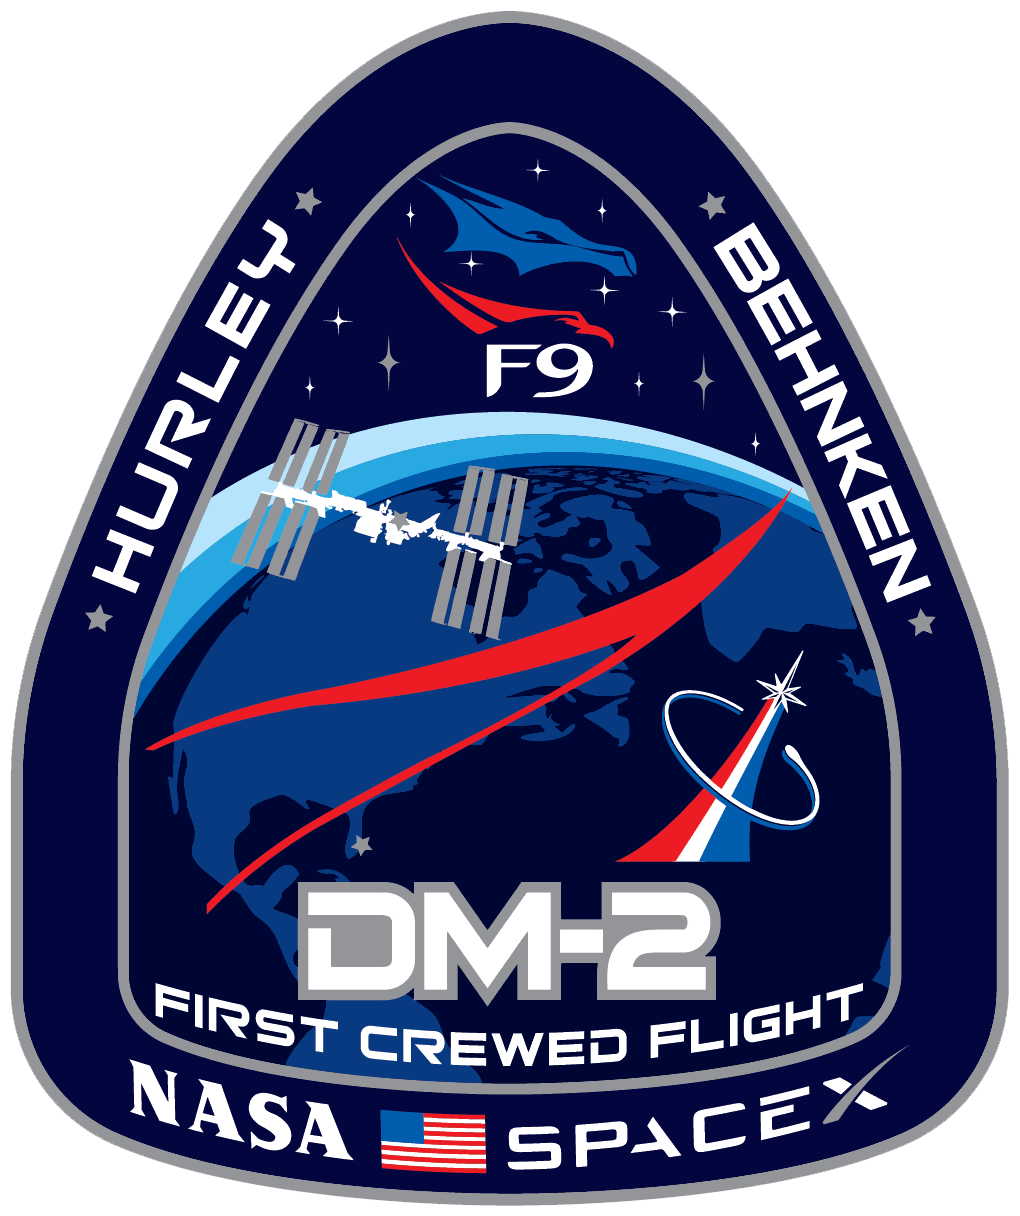 Crew Dragon Demo 2 Patch.png